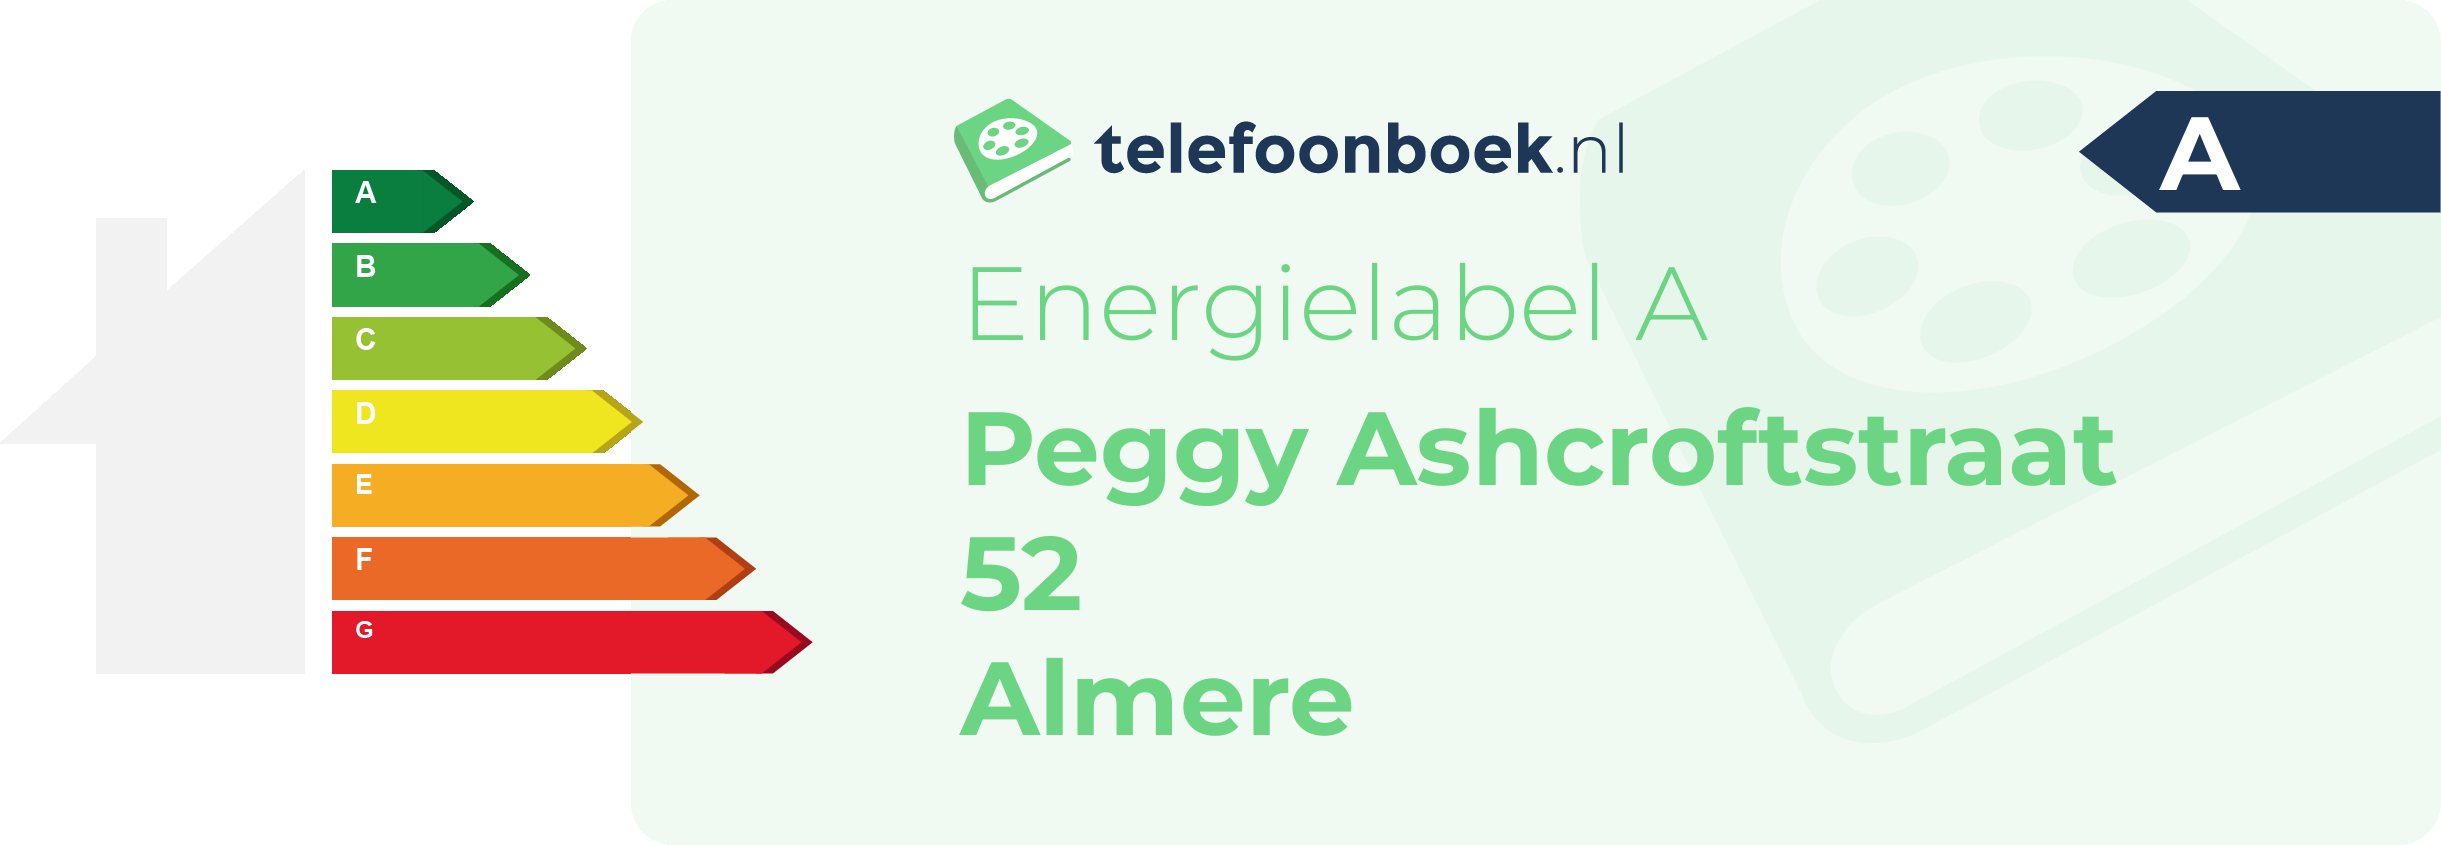 Energielabel Peggy Ashcroftstraat 52 Almere